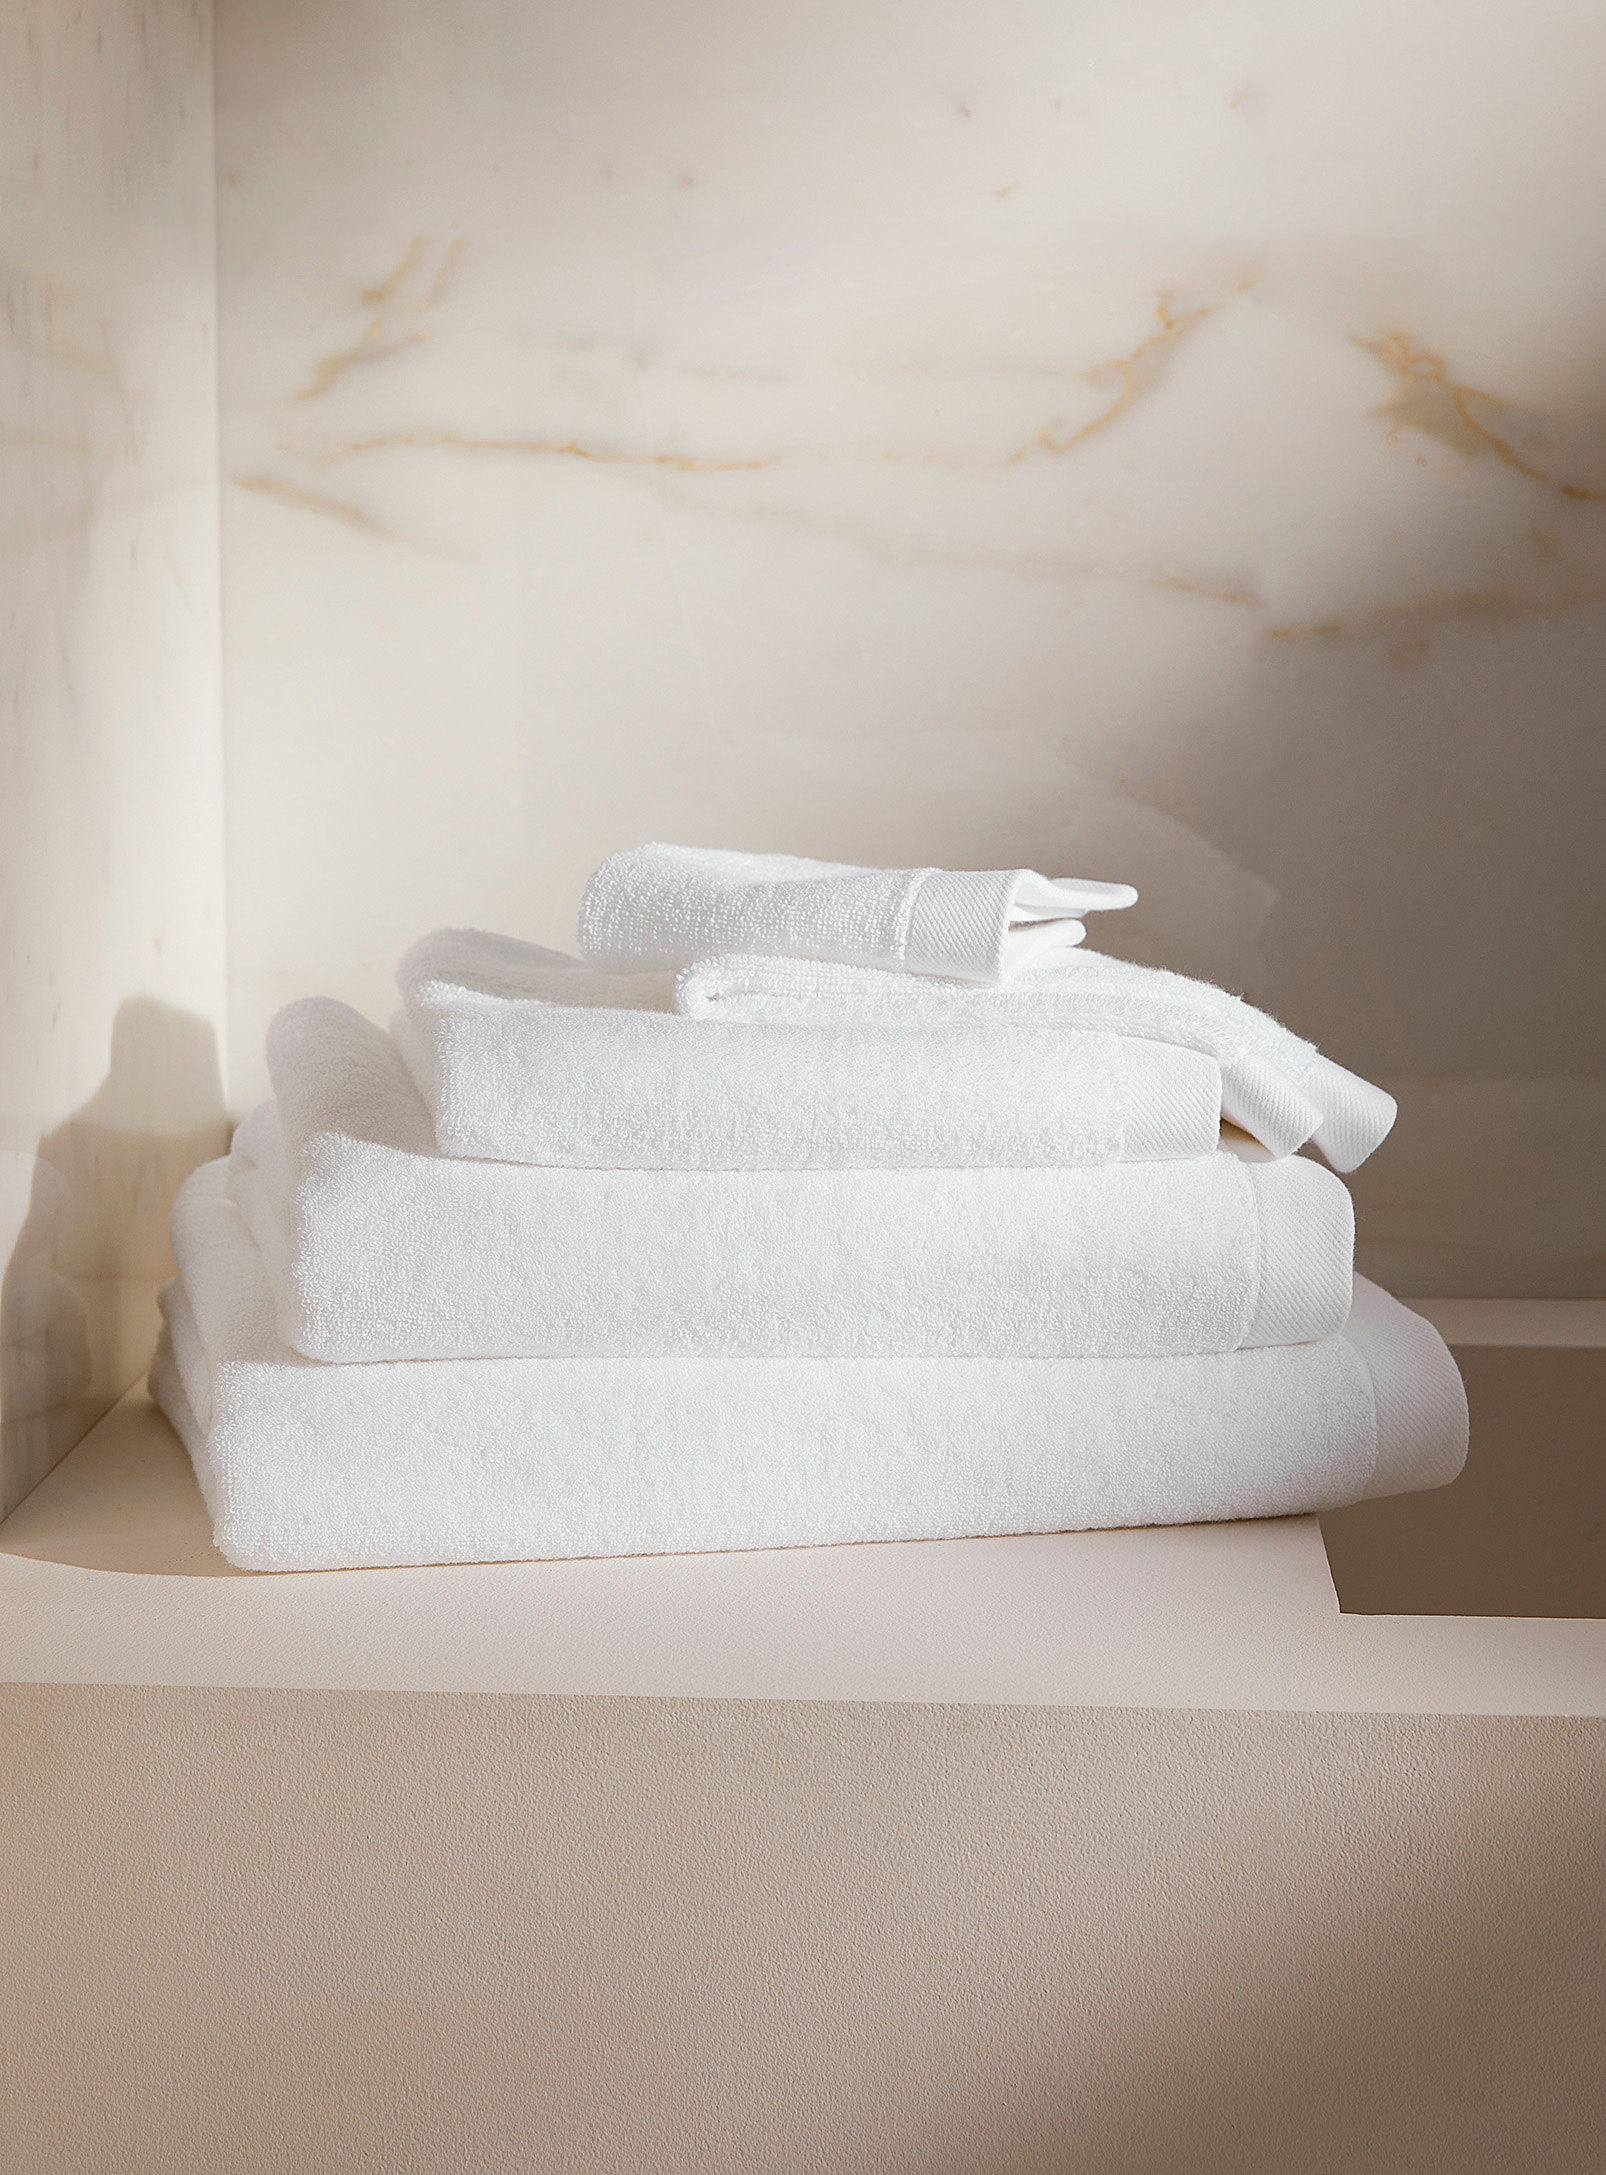 Simons Maison Céleste Zero-twist Towels Soft And Plush, Highly Absorbent In White